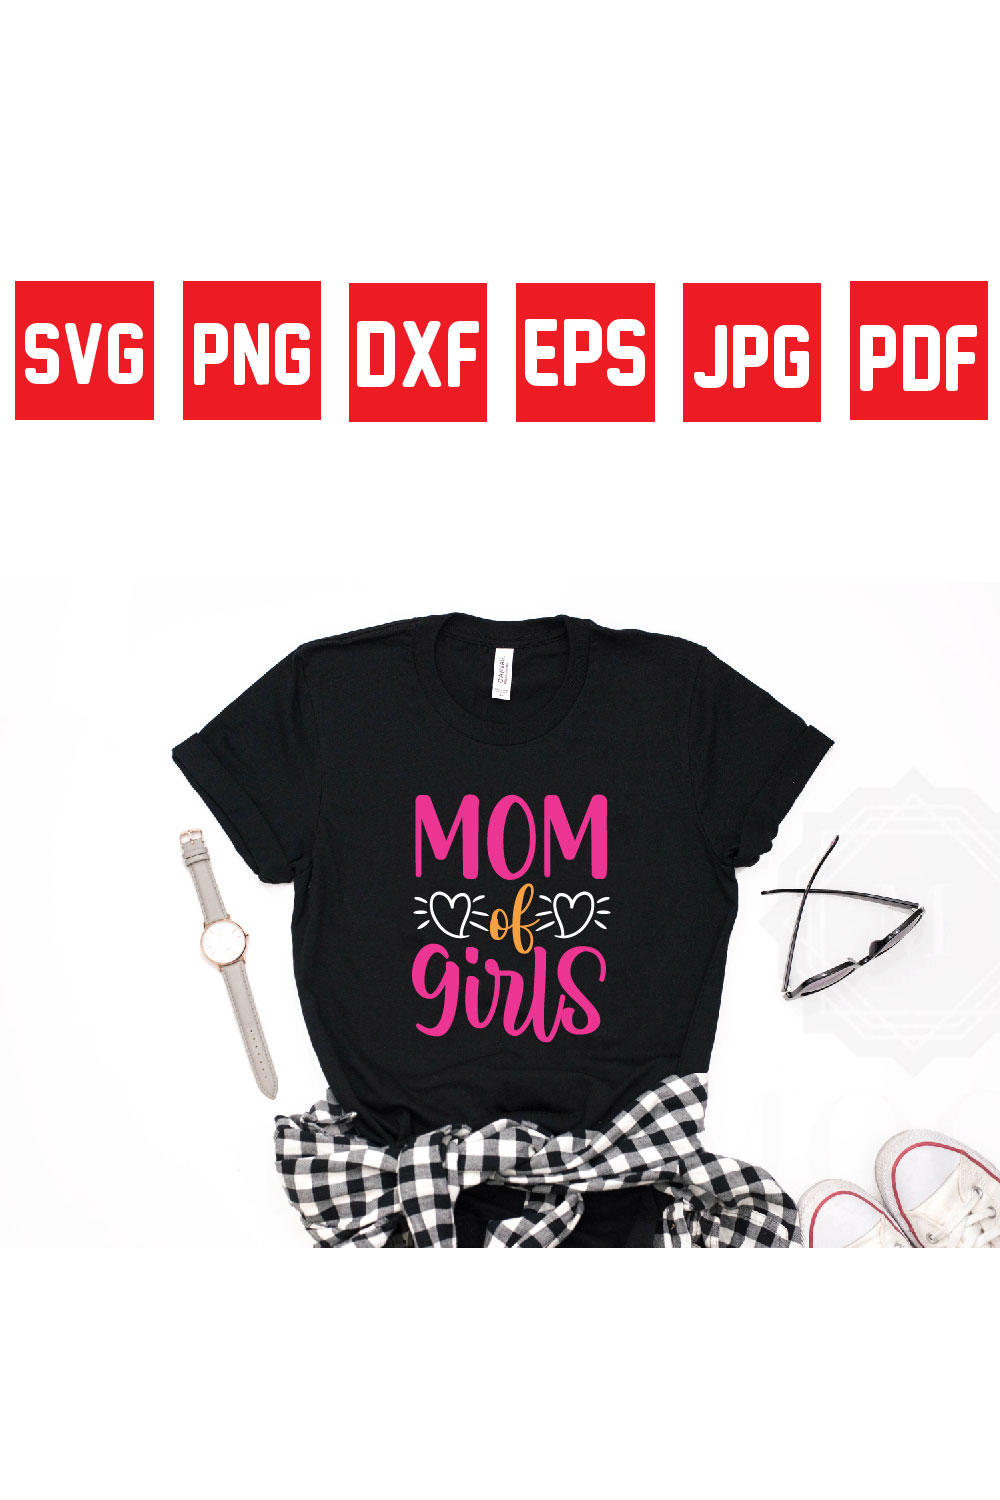 mom of girls pinterest preview image.